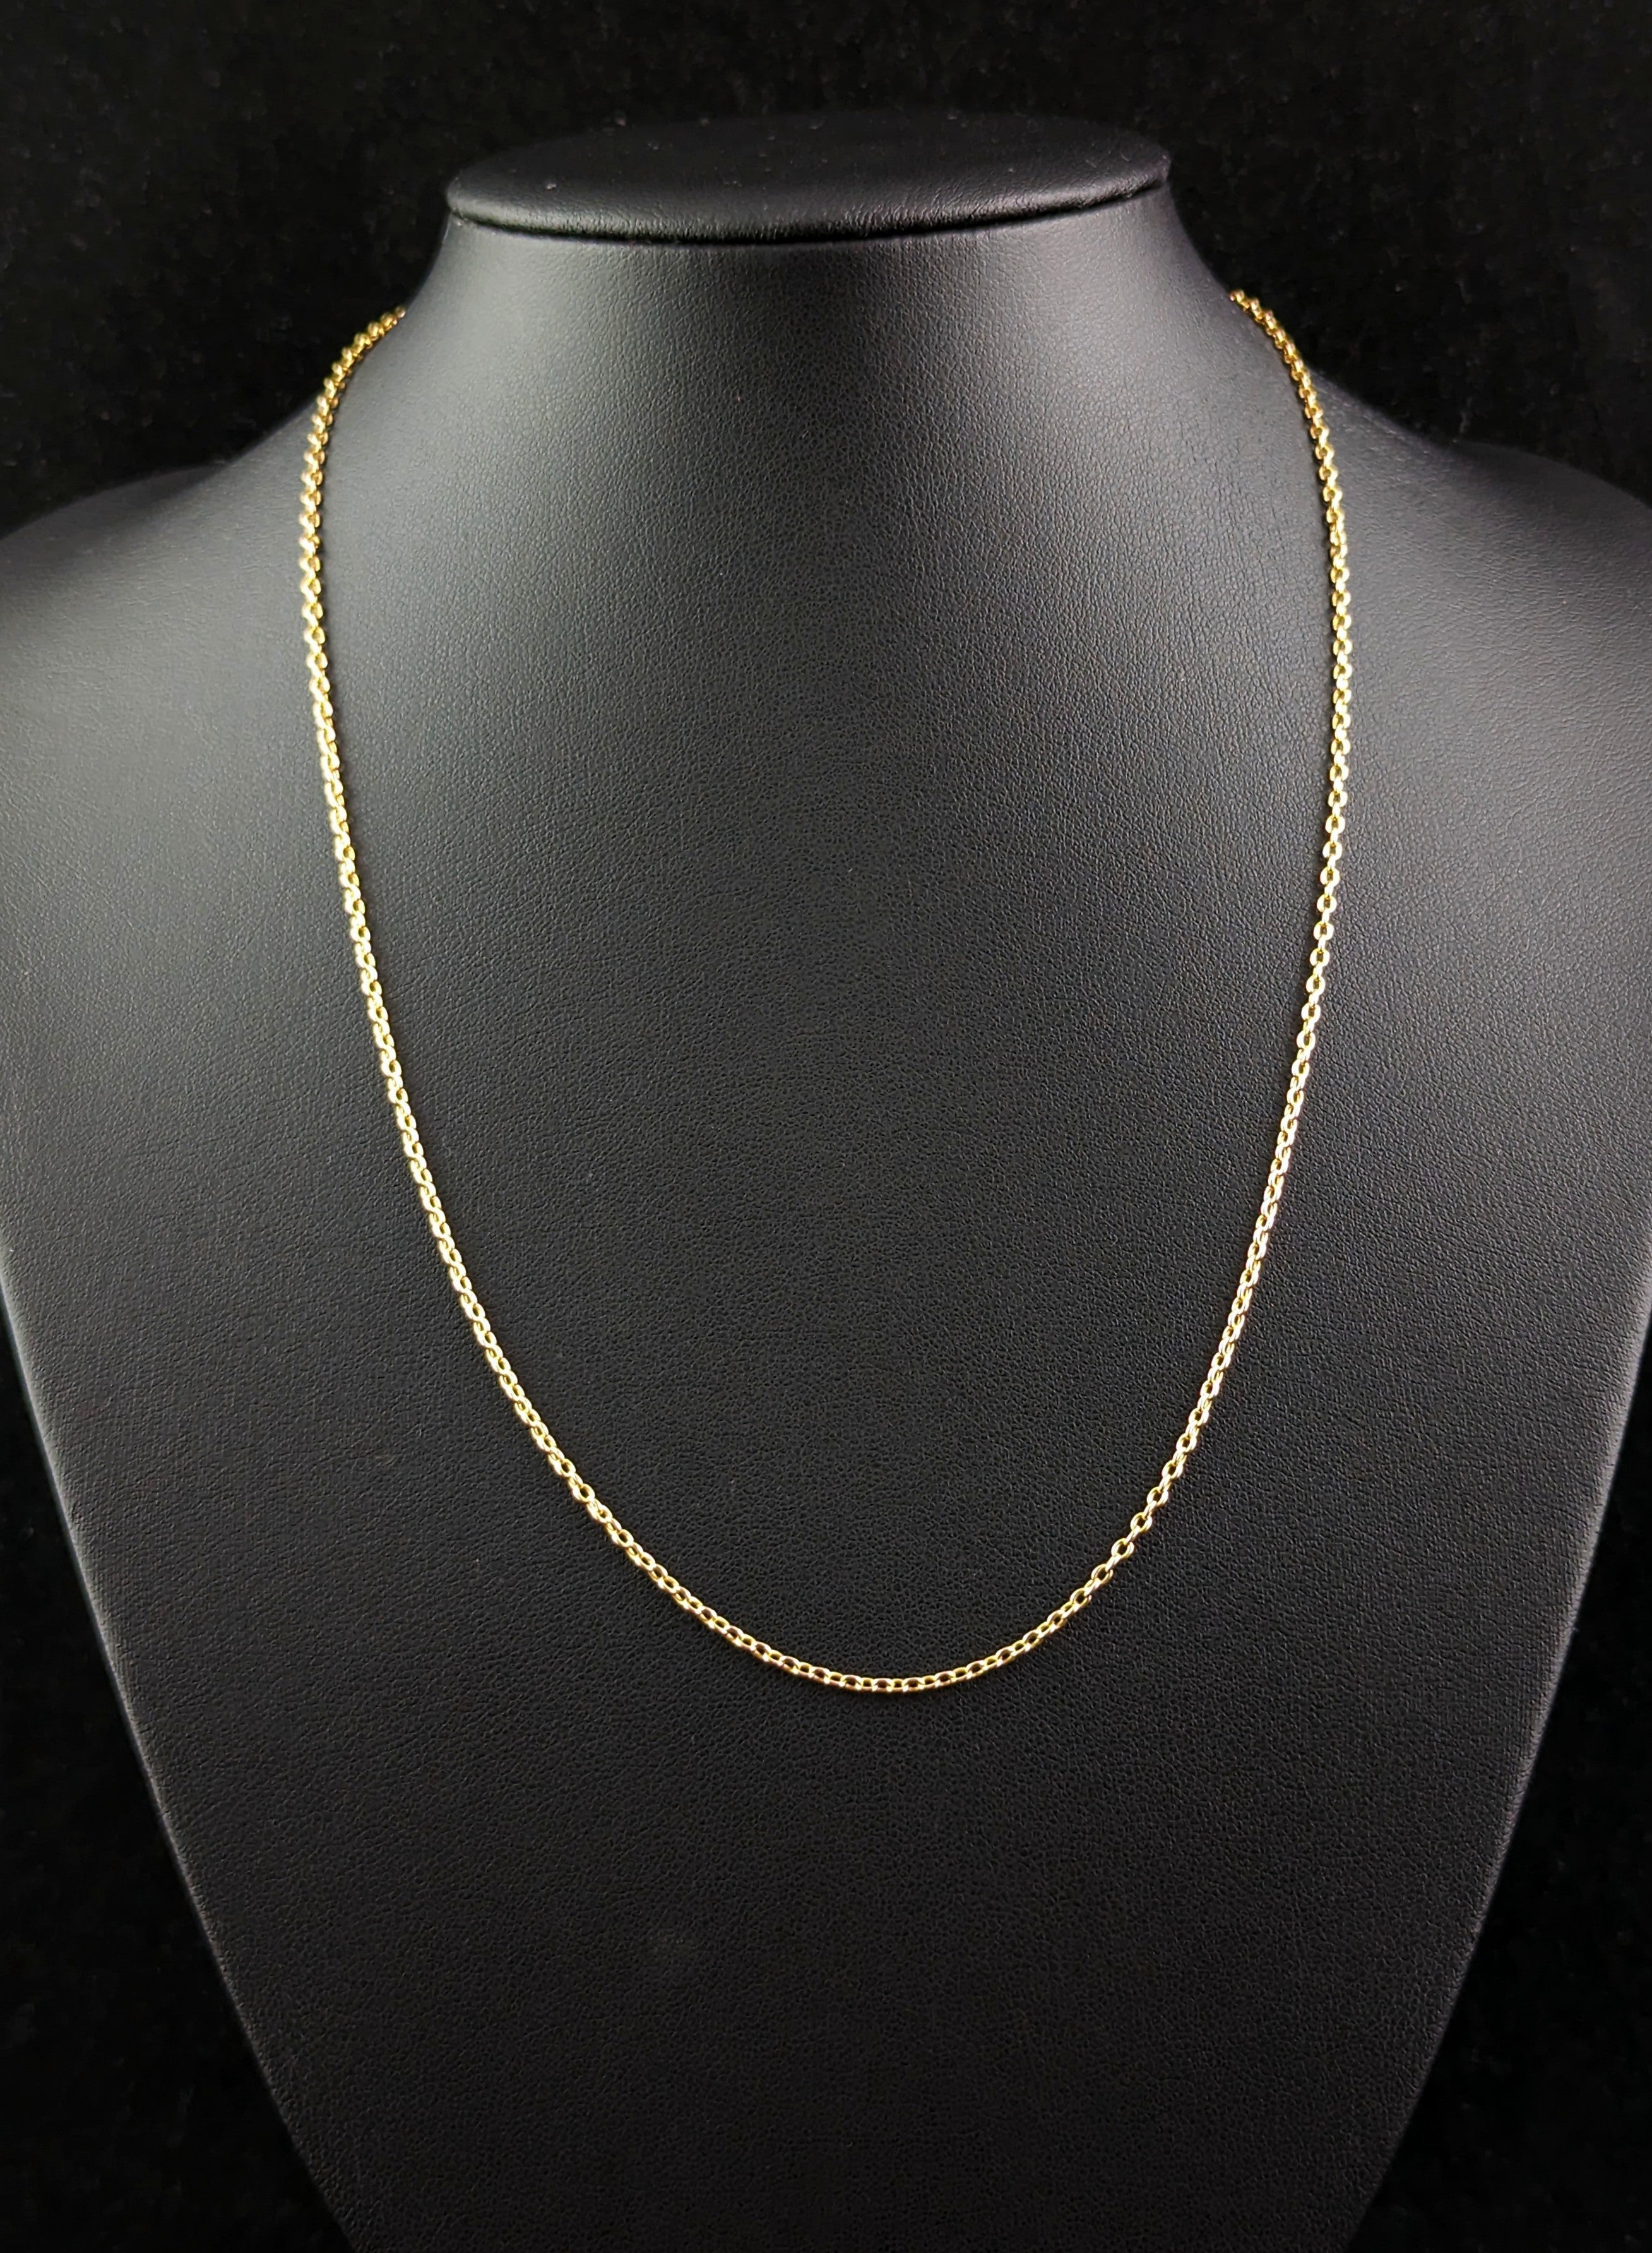 Be charmed by this beautiful antique, Edwardian 15kt yellow gold Belcher link chain necklace, with its lovely rich golden glow it's hard not to be!

We love an antique chain here, such versatile, staple and wearable pieces of jewellery, this one is